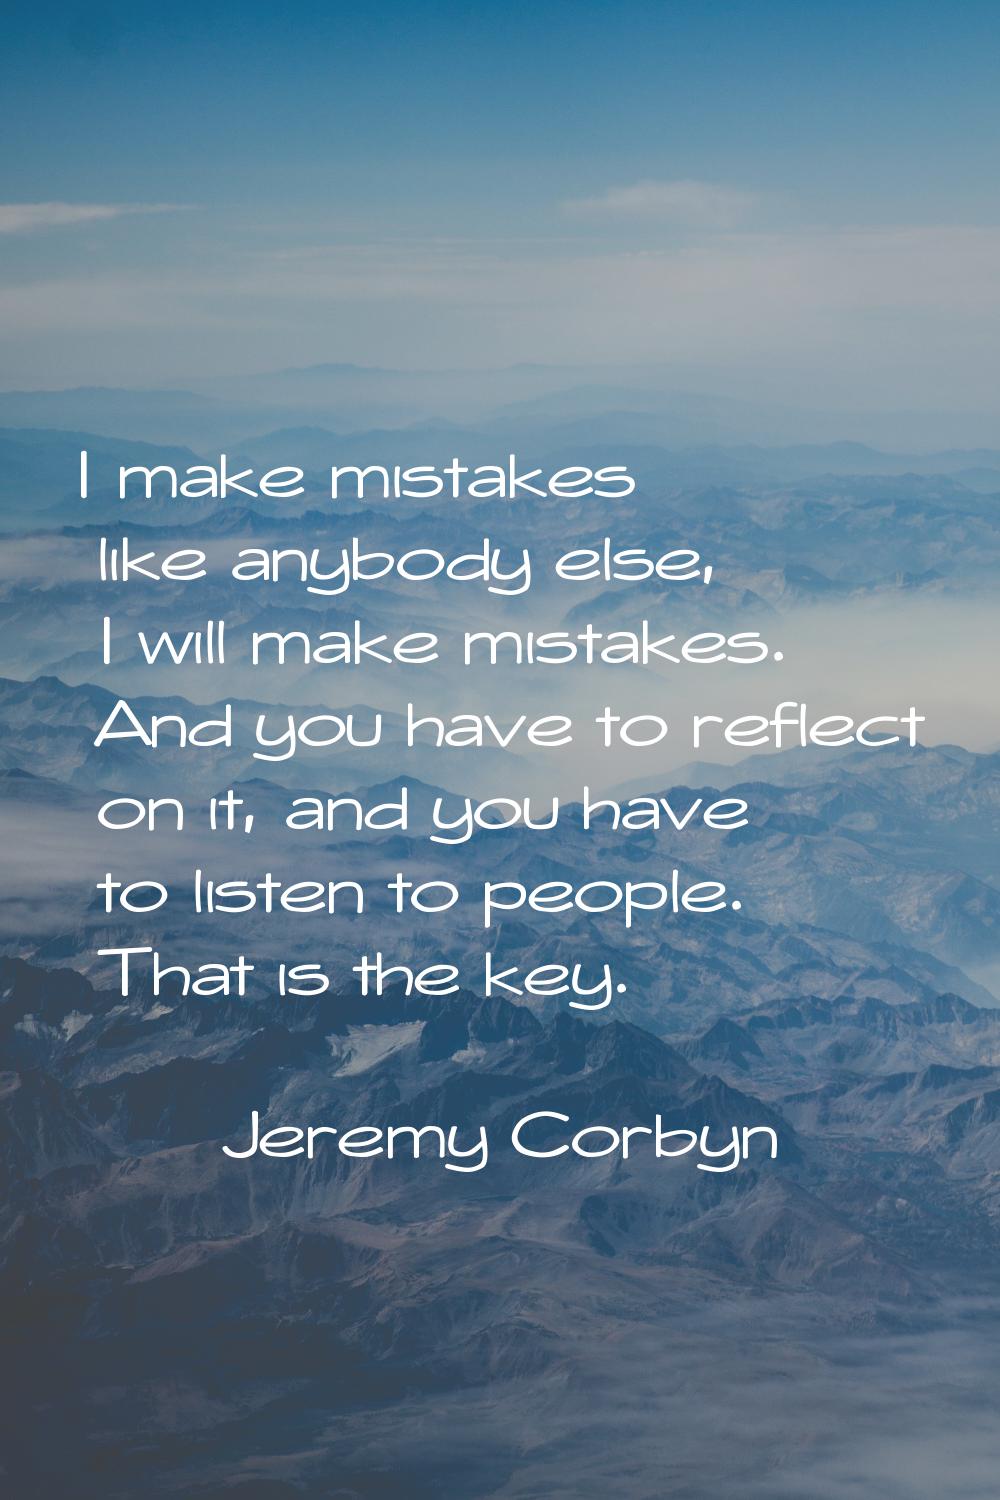 I make mistakes like anybody else, I will make mistakes. And you have to reflect on it, and you hav